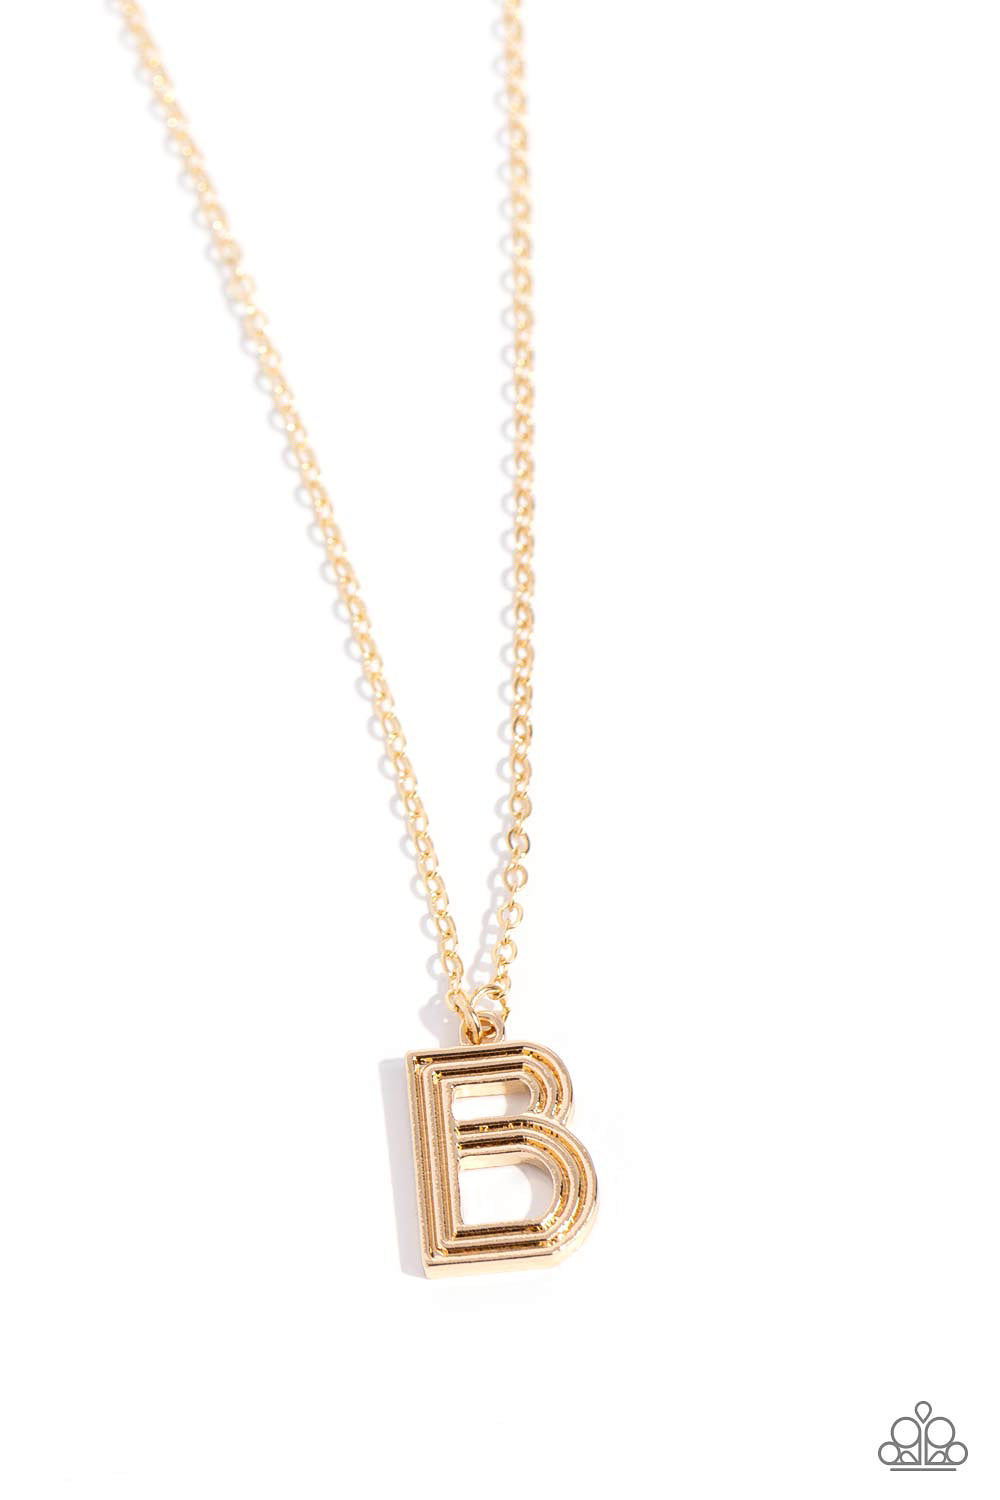 Leave Your Initials - gold - B - Paparazzi necklace